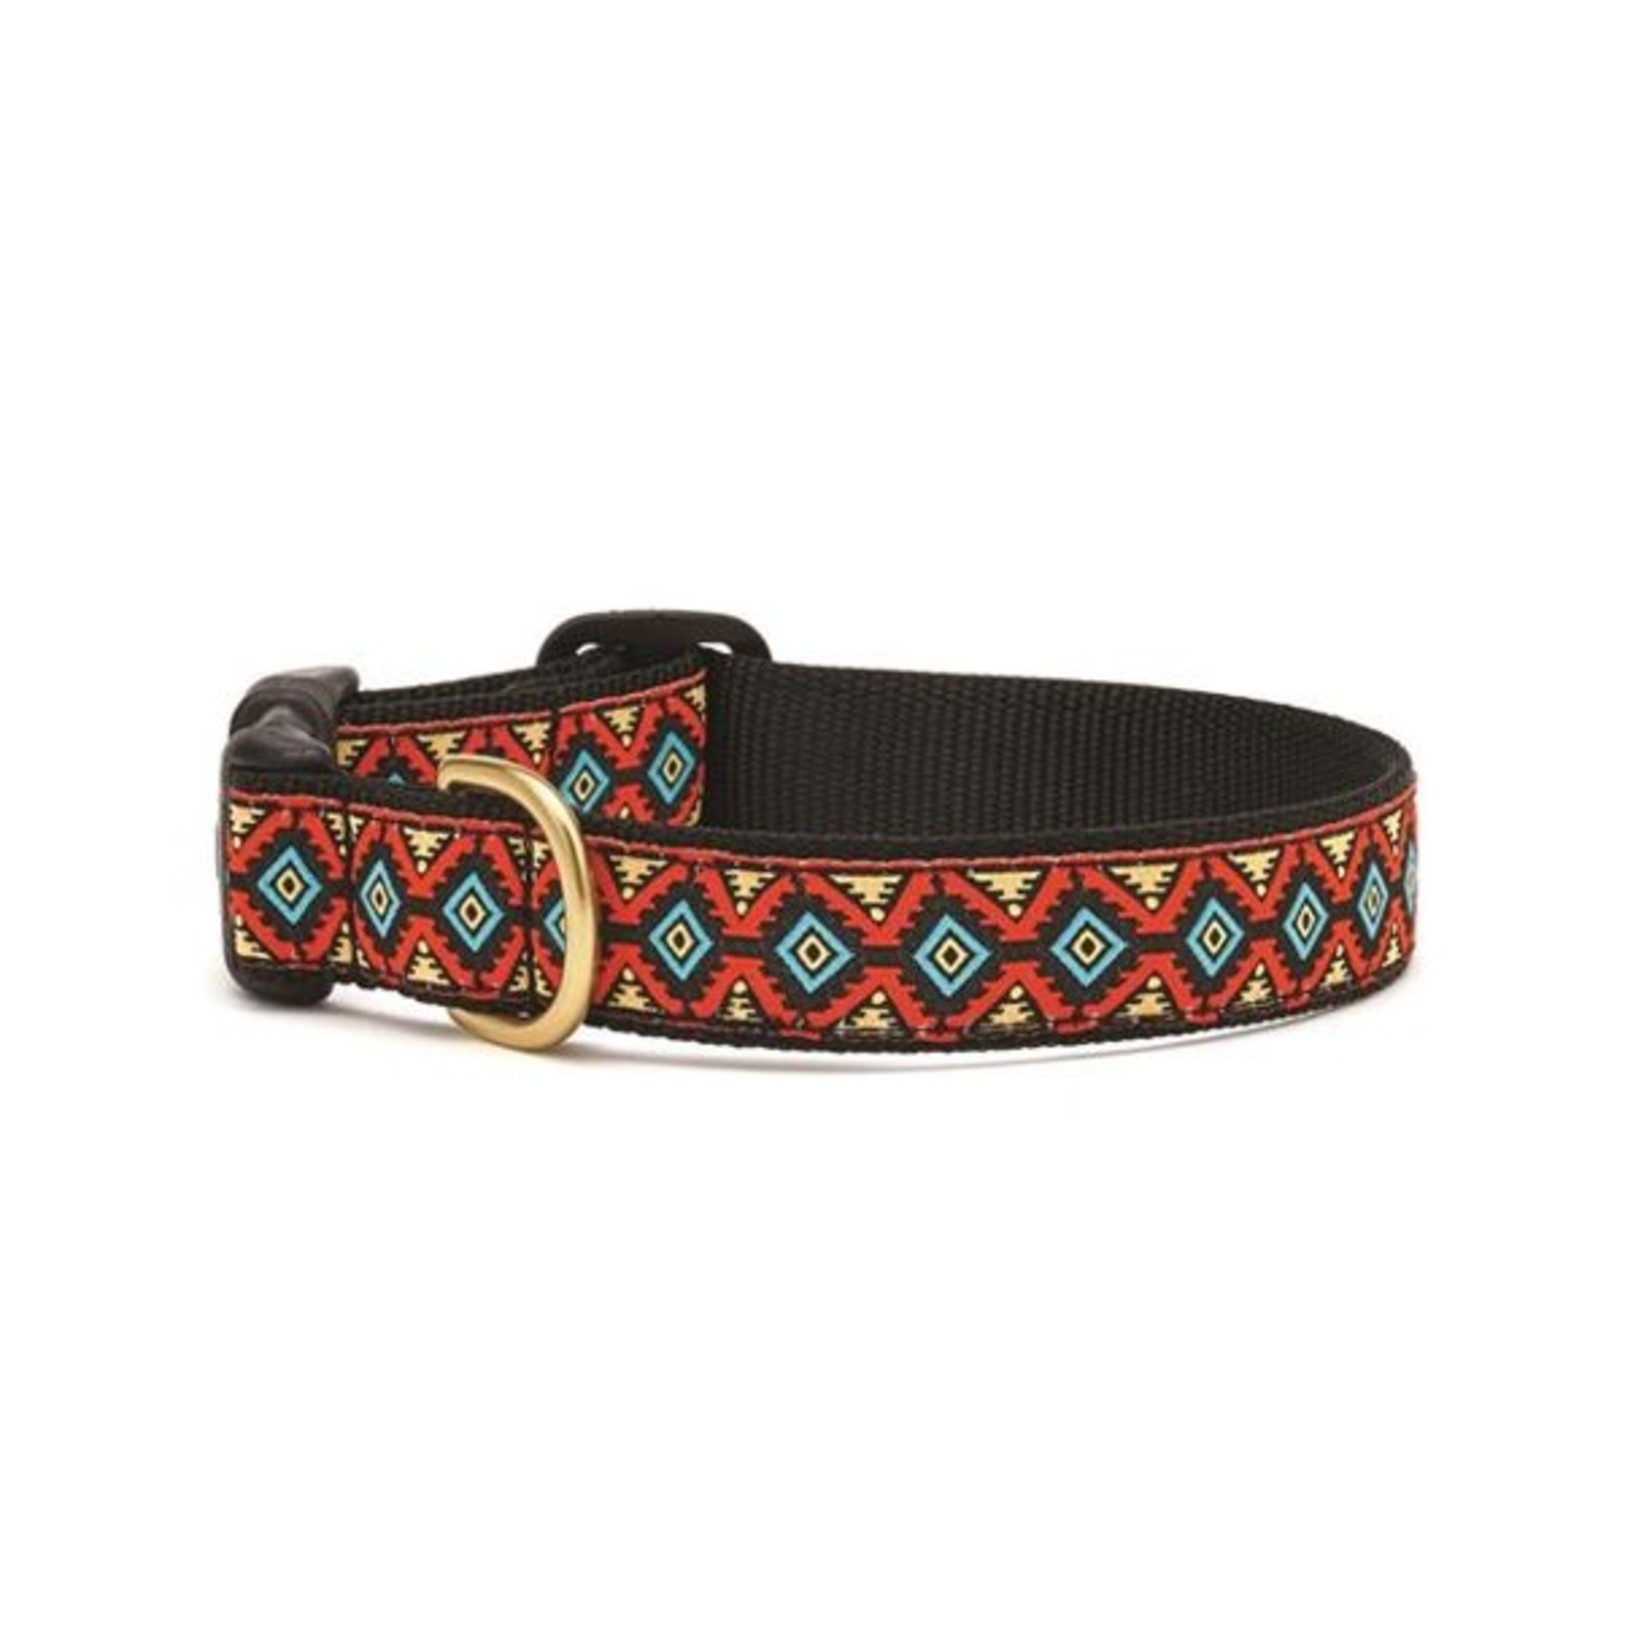 Up Country UPCOUNTRY Santa Fe Dog Collar - FINAL SALE, No Exchanges or Refunds